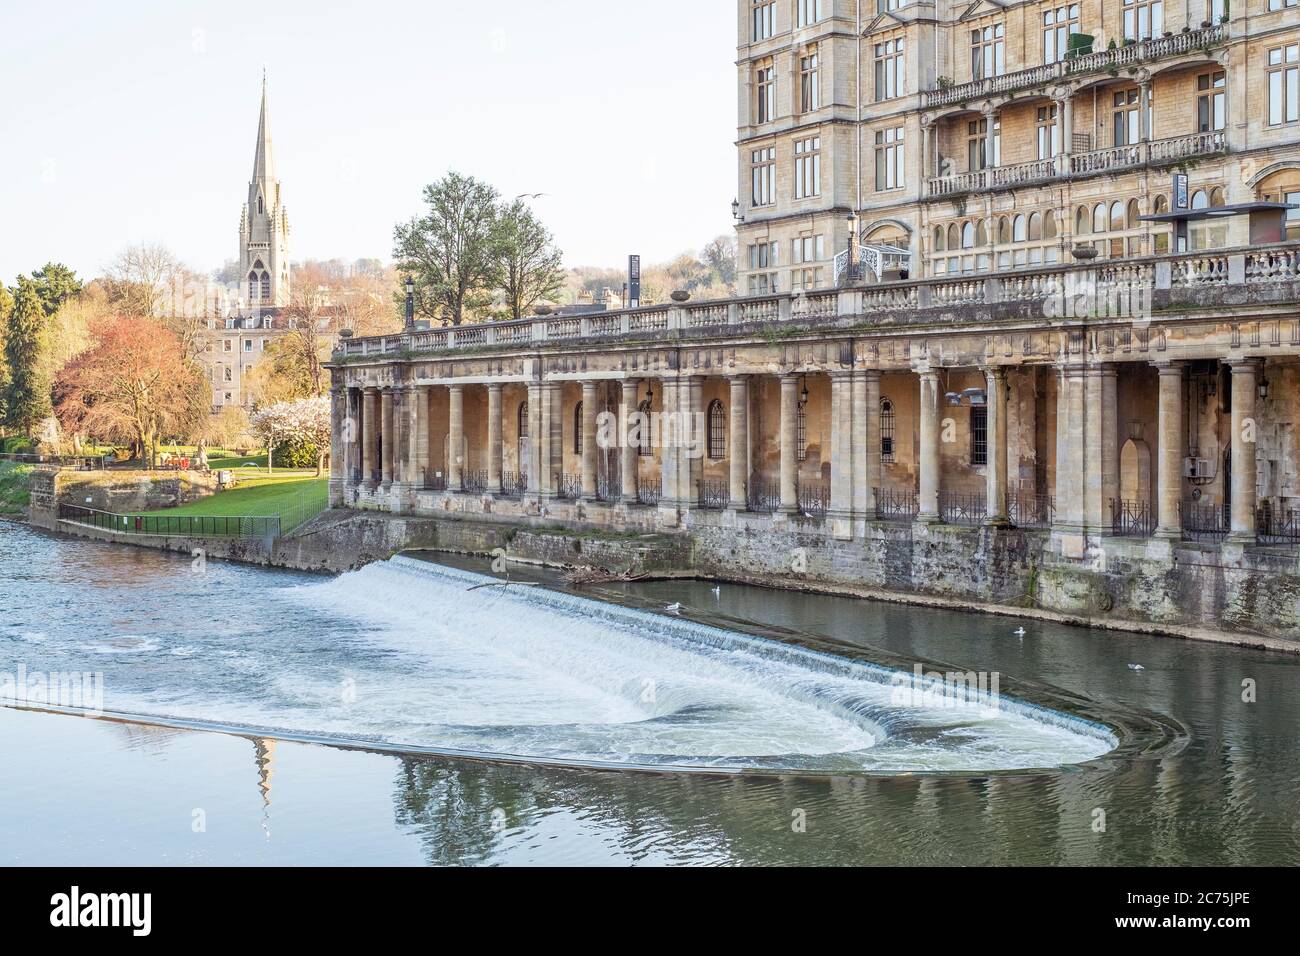 Pulteney Weir and Colonnades, Bath, UK Stock Photo